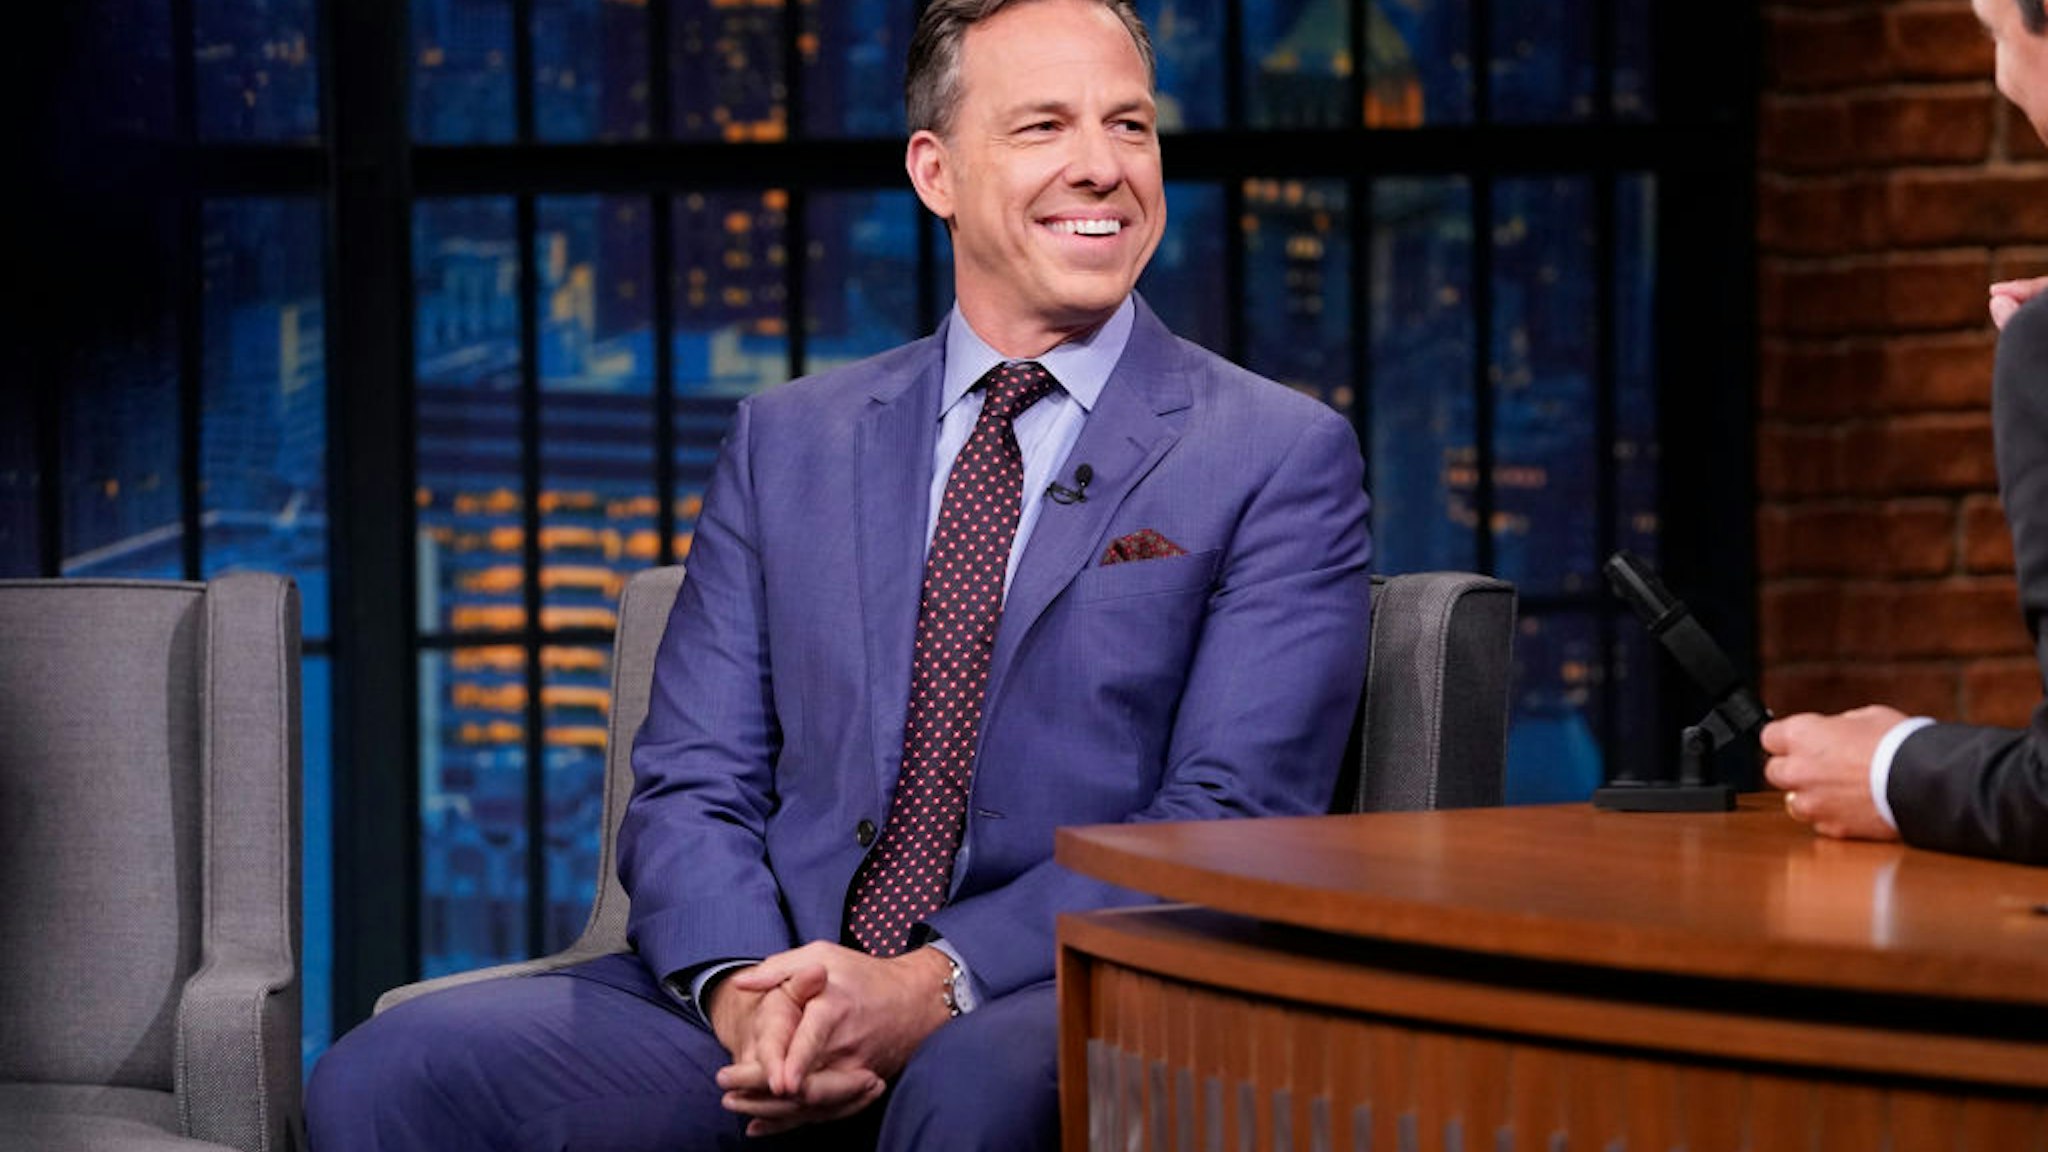 LATE NIGHT WITH SETH MEYERS -- Episode 875 -- Pictured: CNN's Jake Tapper during an interview with host Seth Meyers on August 15, 2019 -- (Photo by: Lloyd Bishop/NBCU Photo Bank/NBCUniversal via Getty Images via Getty Images)